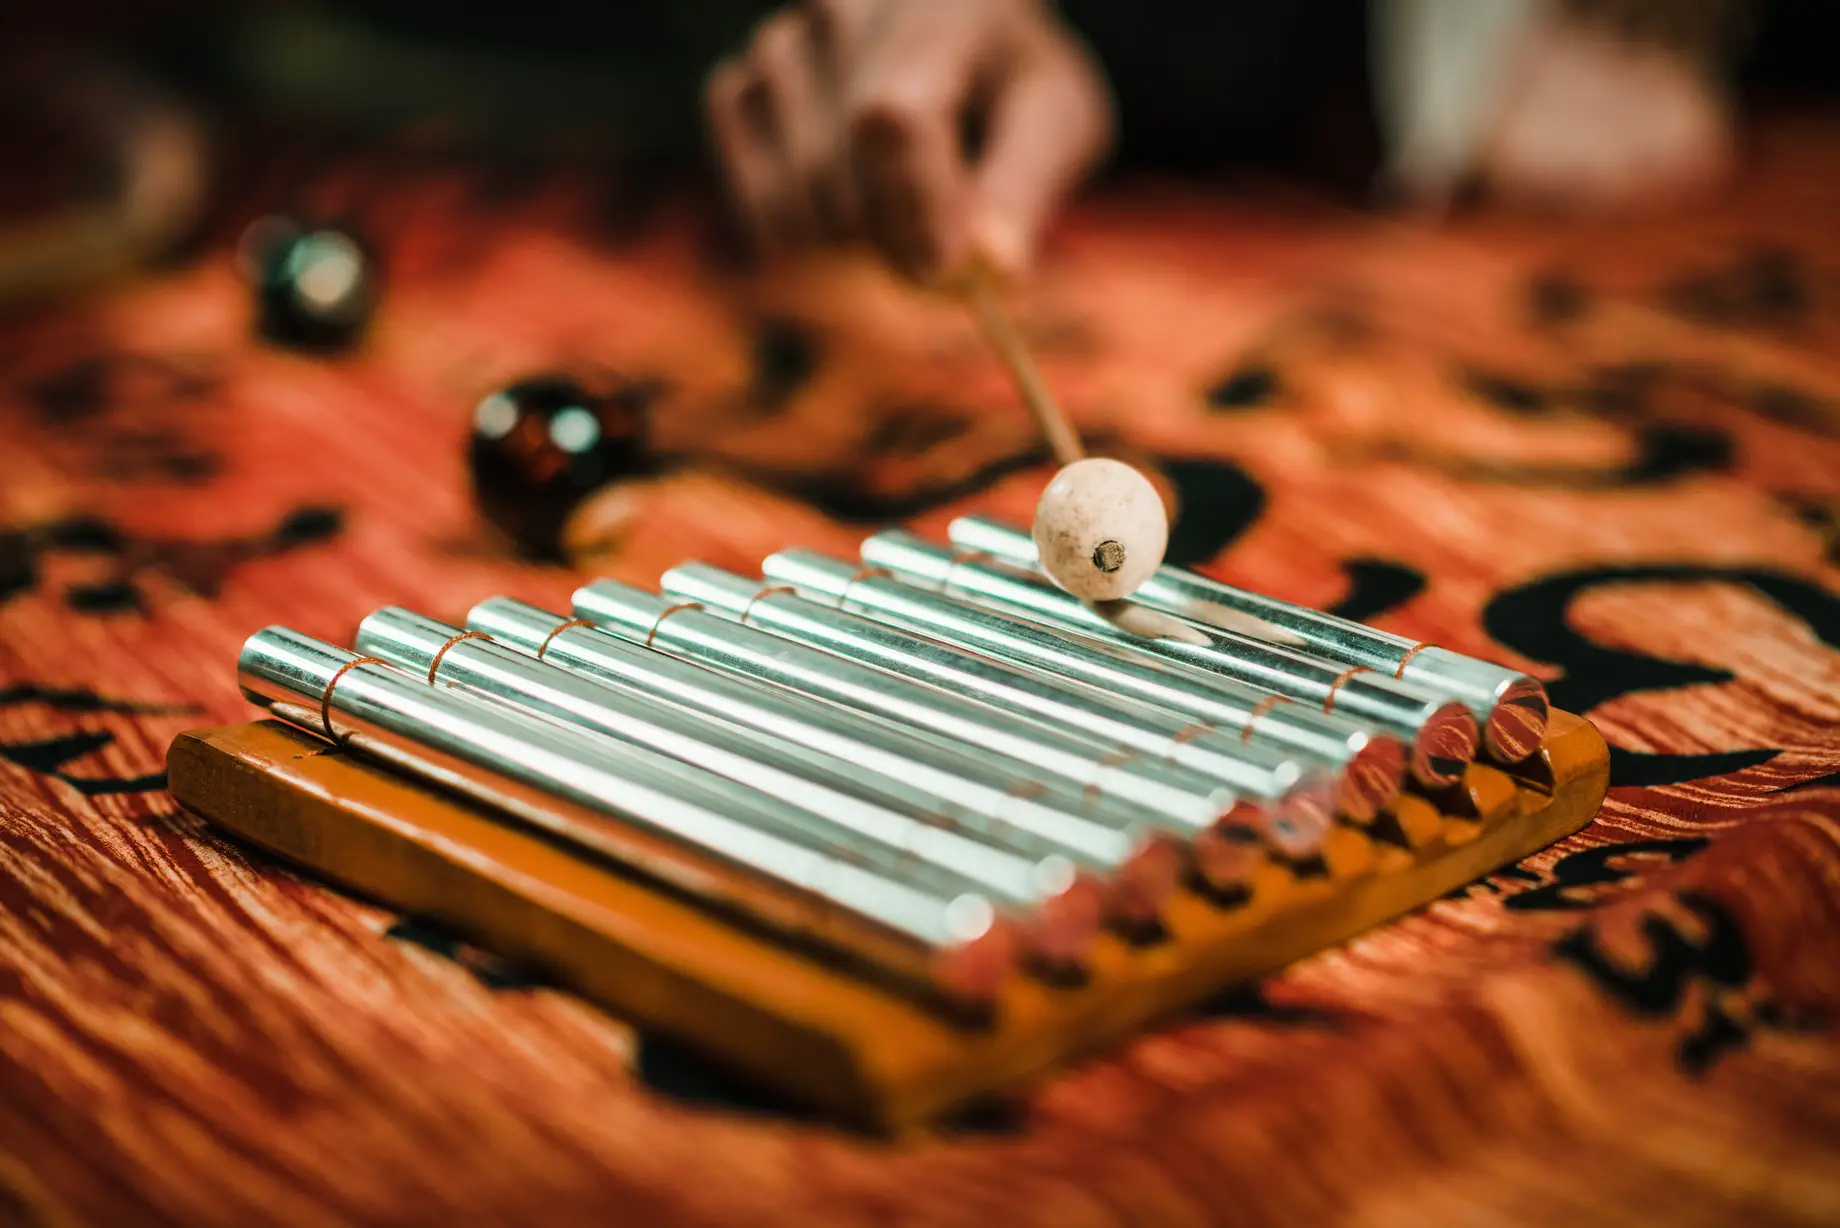 Sound Healing with Tuning Forks